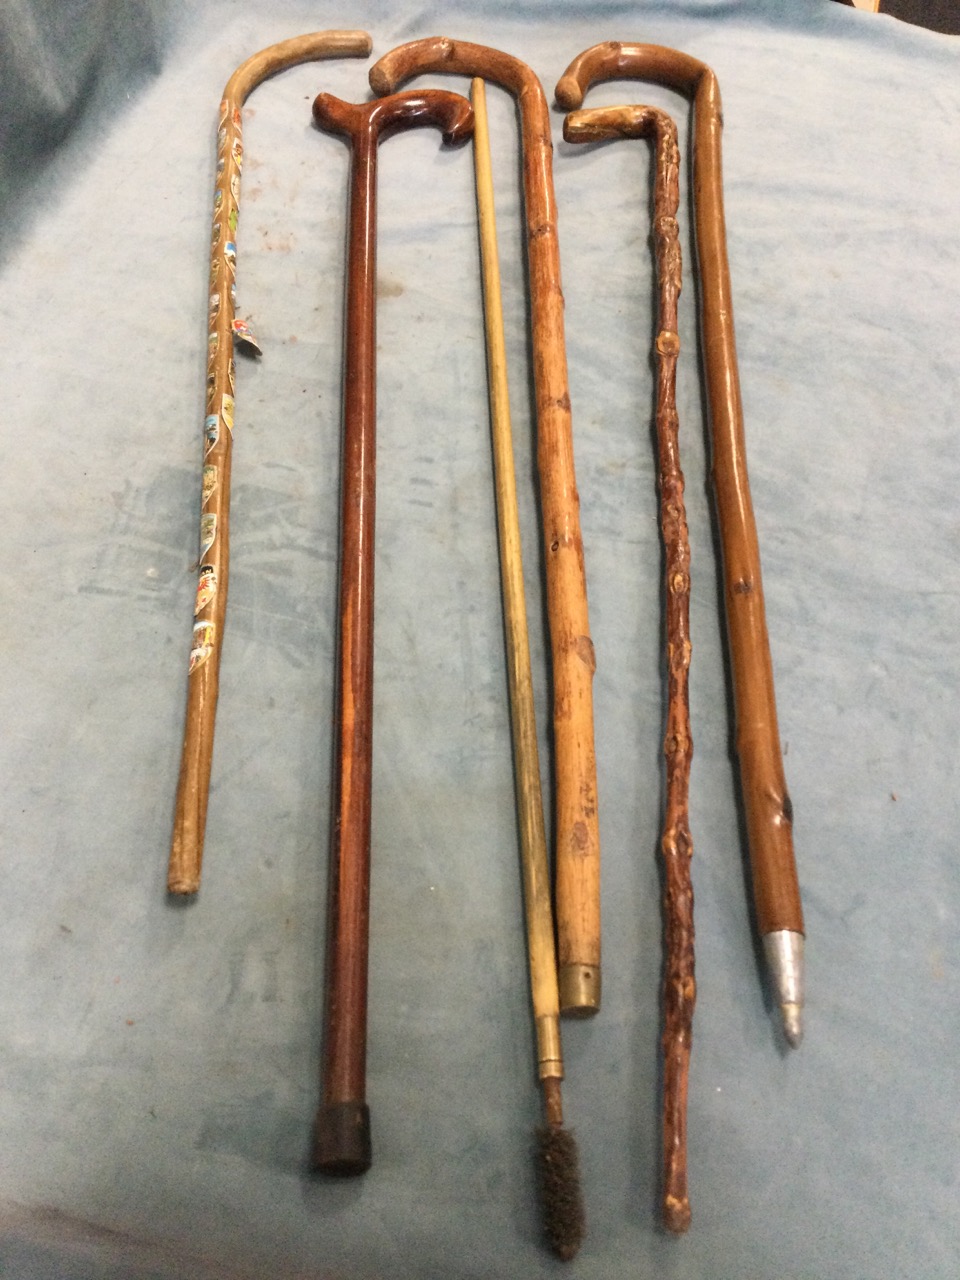 Five miscellaneous walking sticks - alpine, blackthorn, modern, etc.; and a wood gun cleaning rod - Image 3 of 3